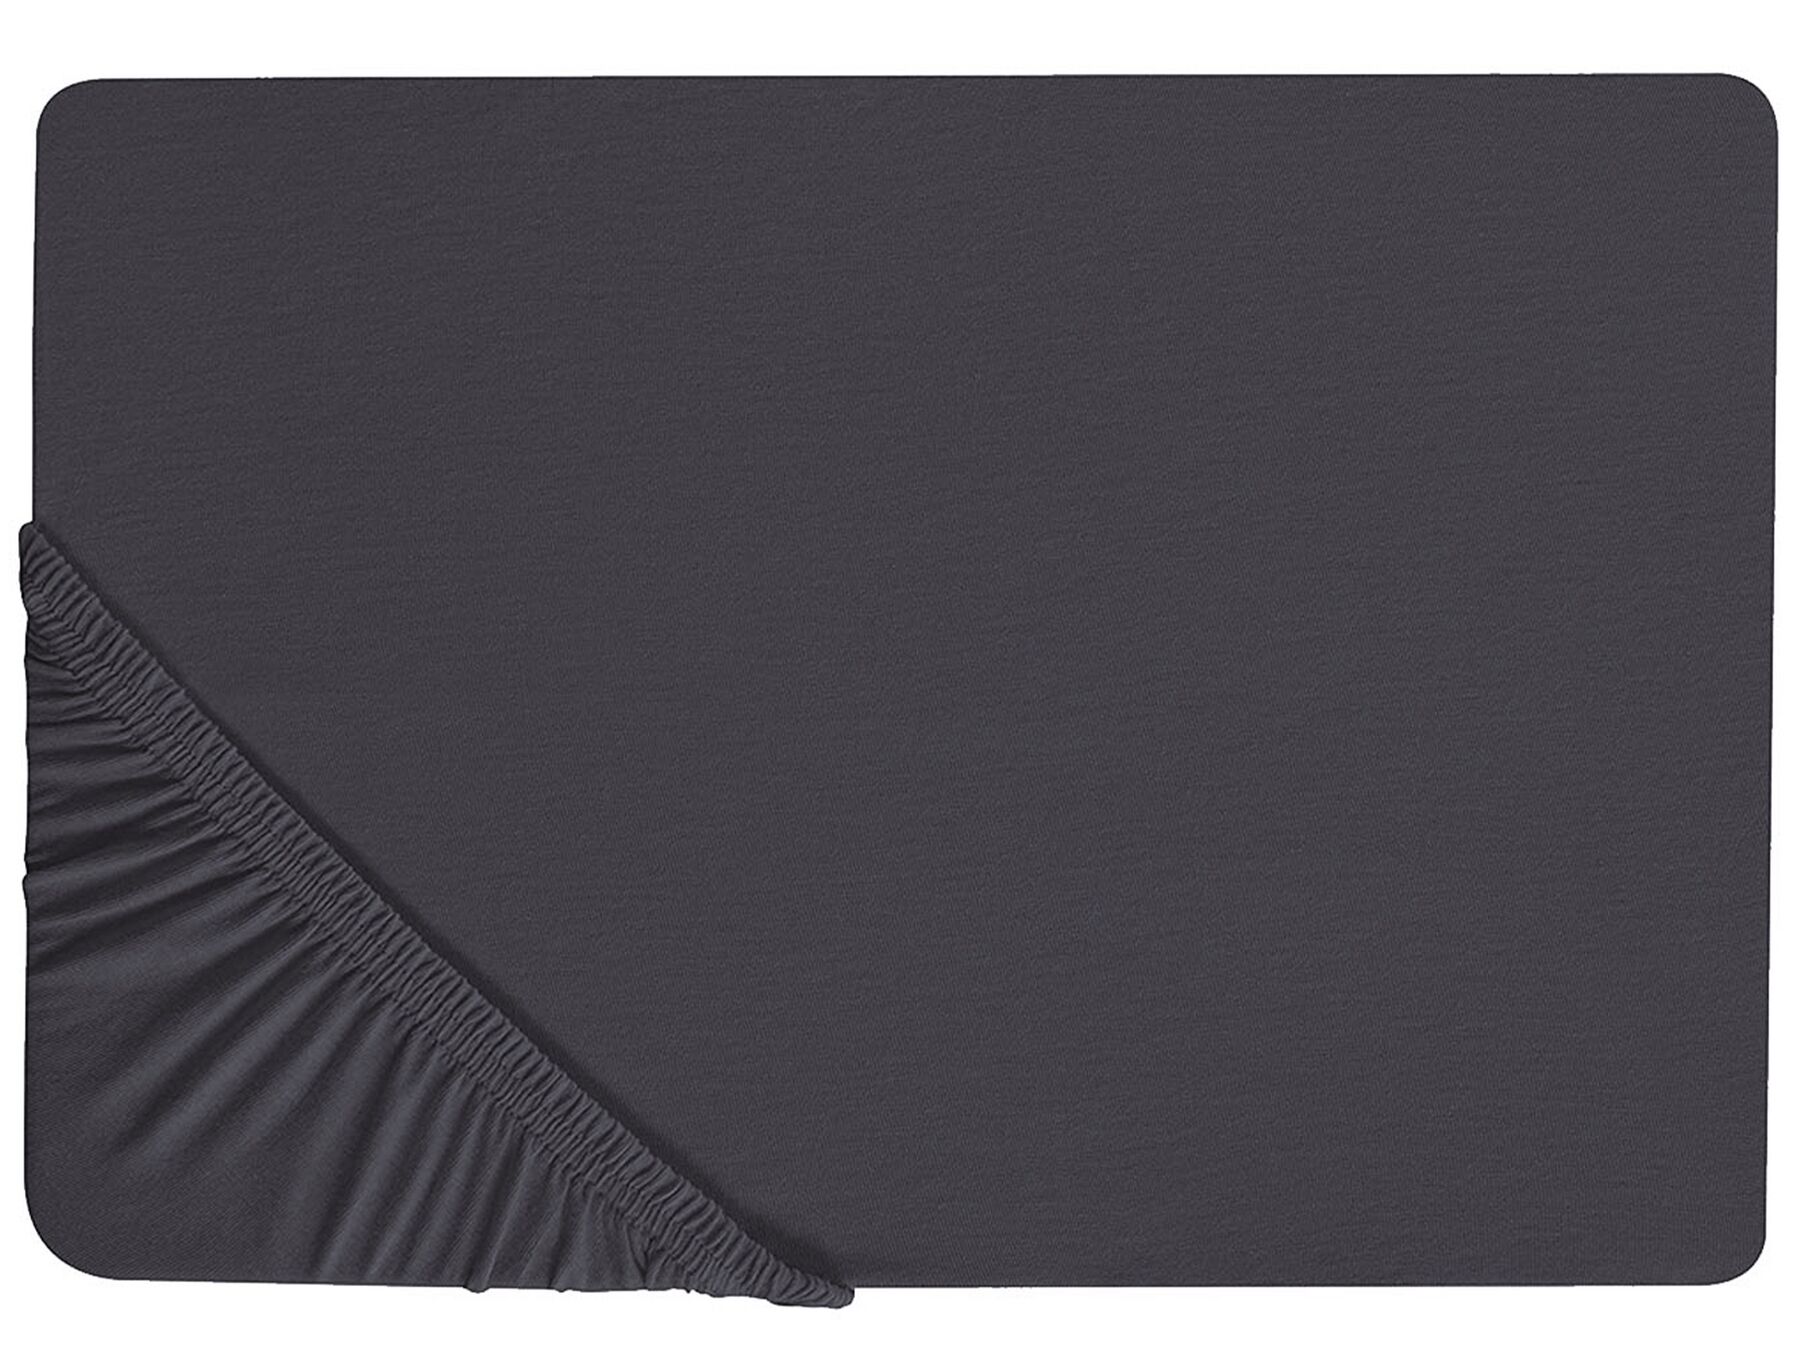 Cotton Fitted Sheet 140 x 200 cm Black HOFUF_815927